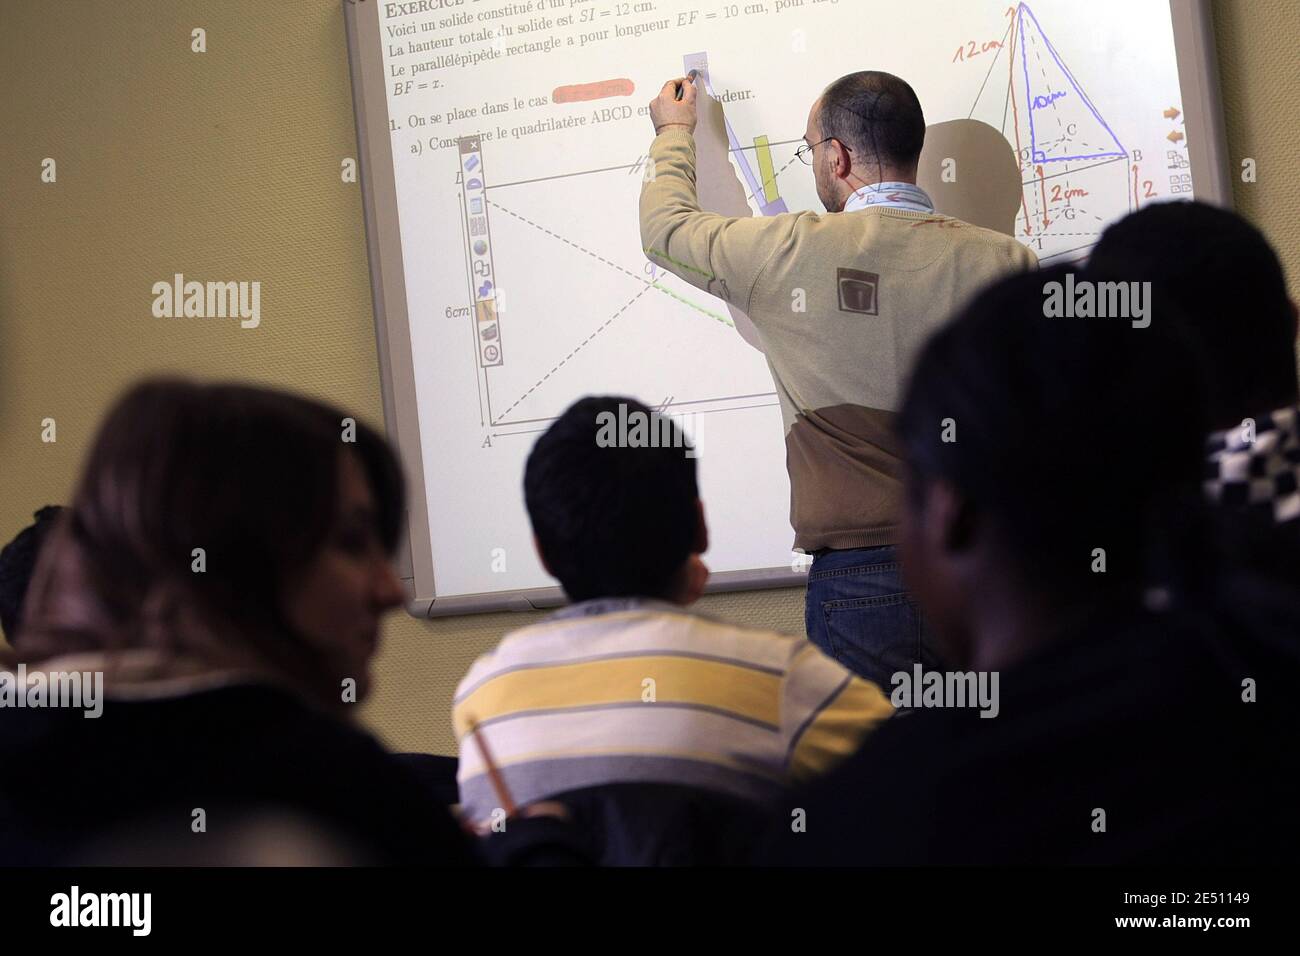 Lesson in the Solignac college in Strasbourg, France, on April 21, 2008. Photo by Antoine/ABACAPRESS.COM Stock Photo